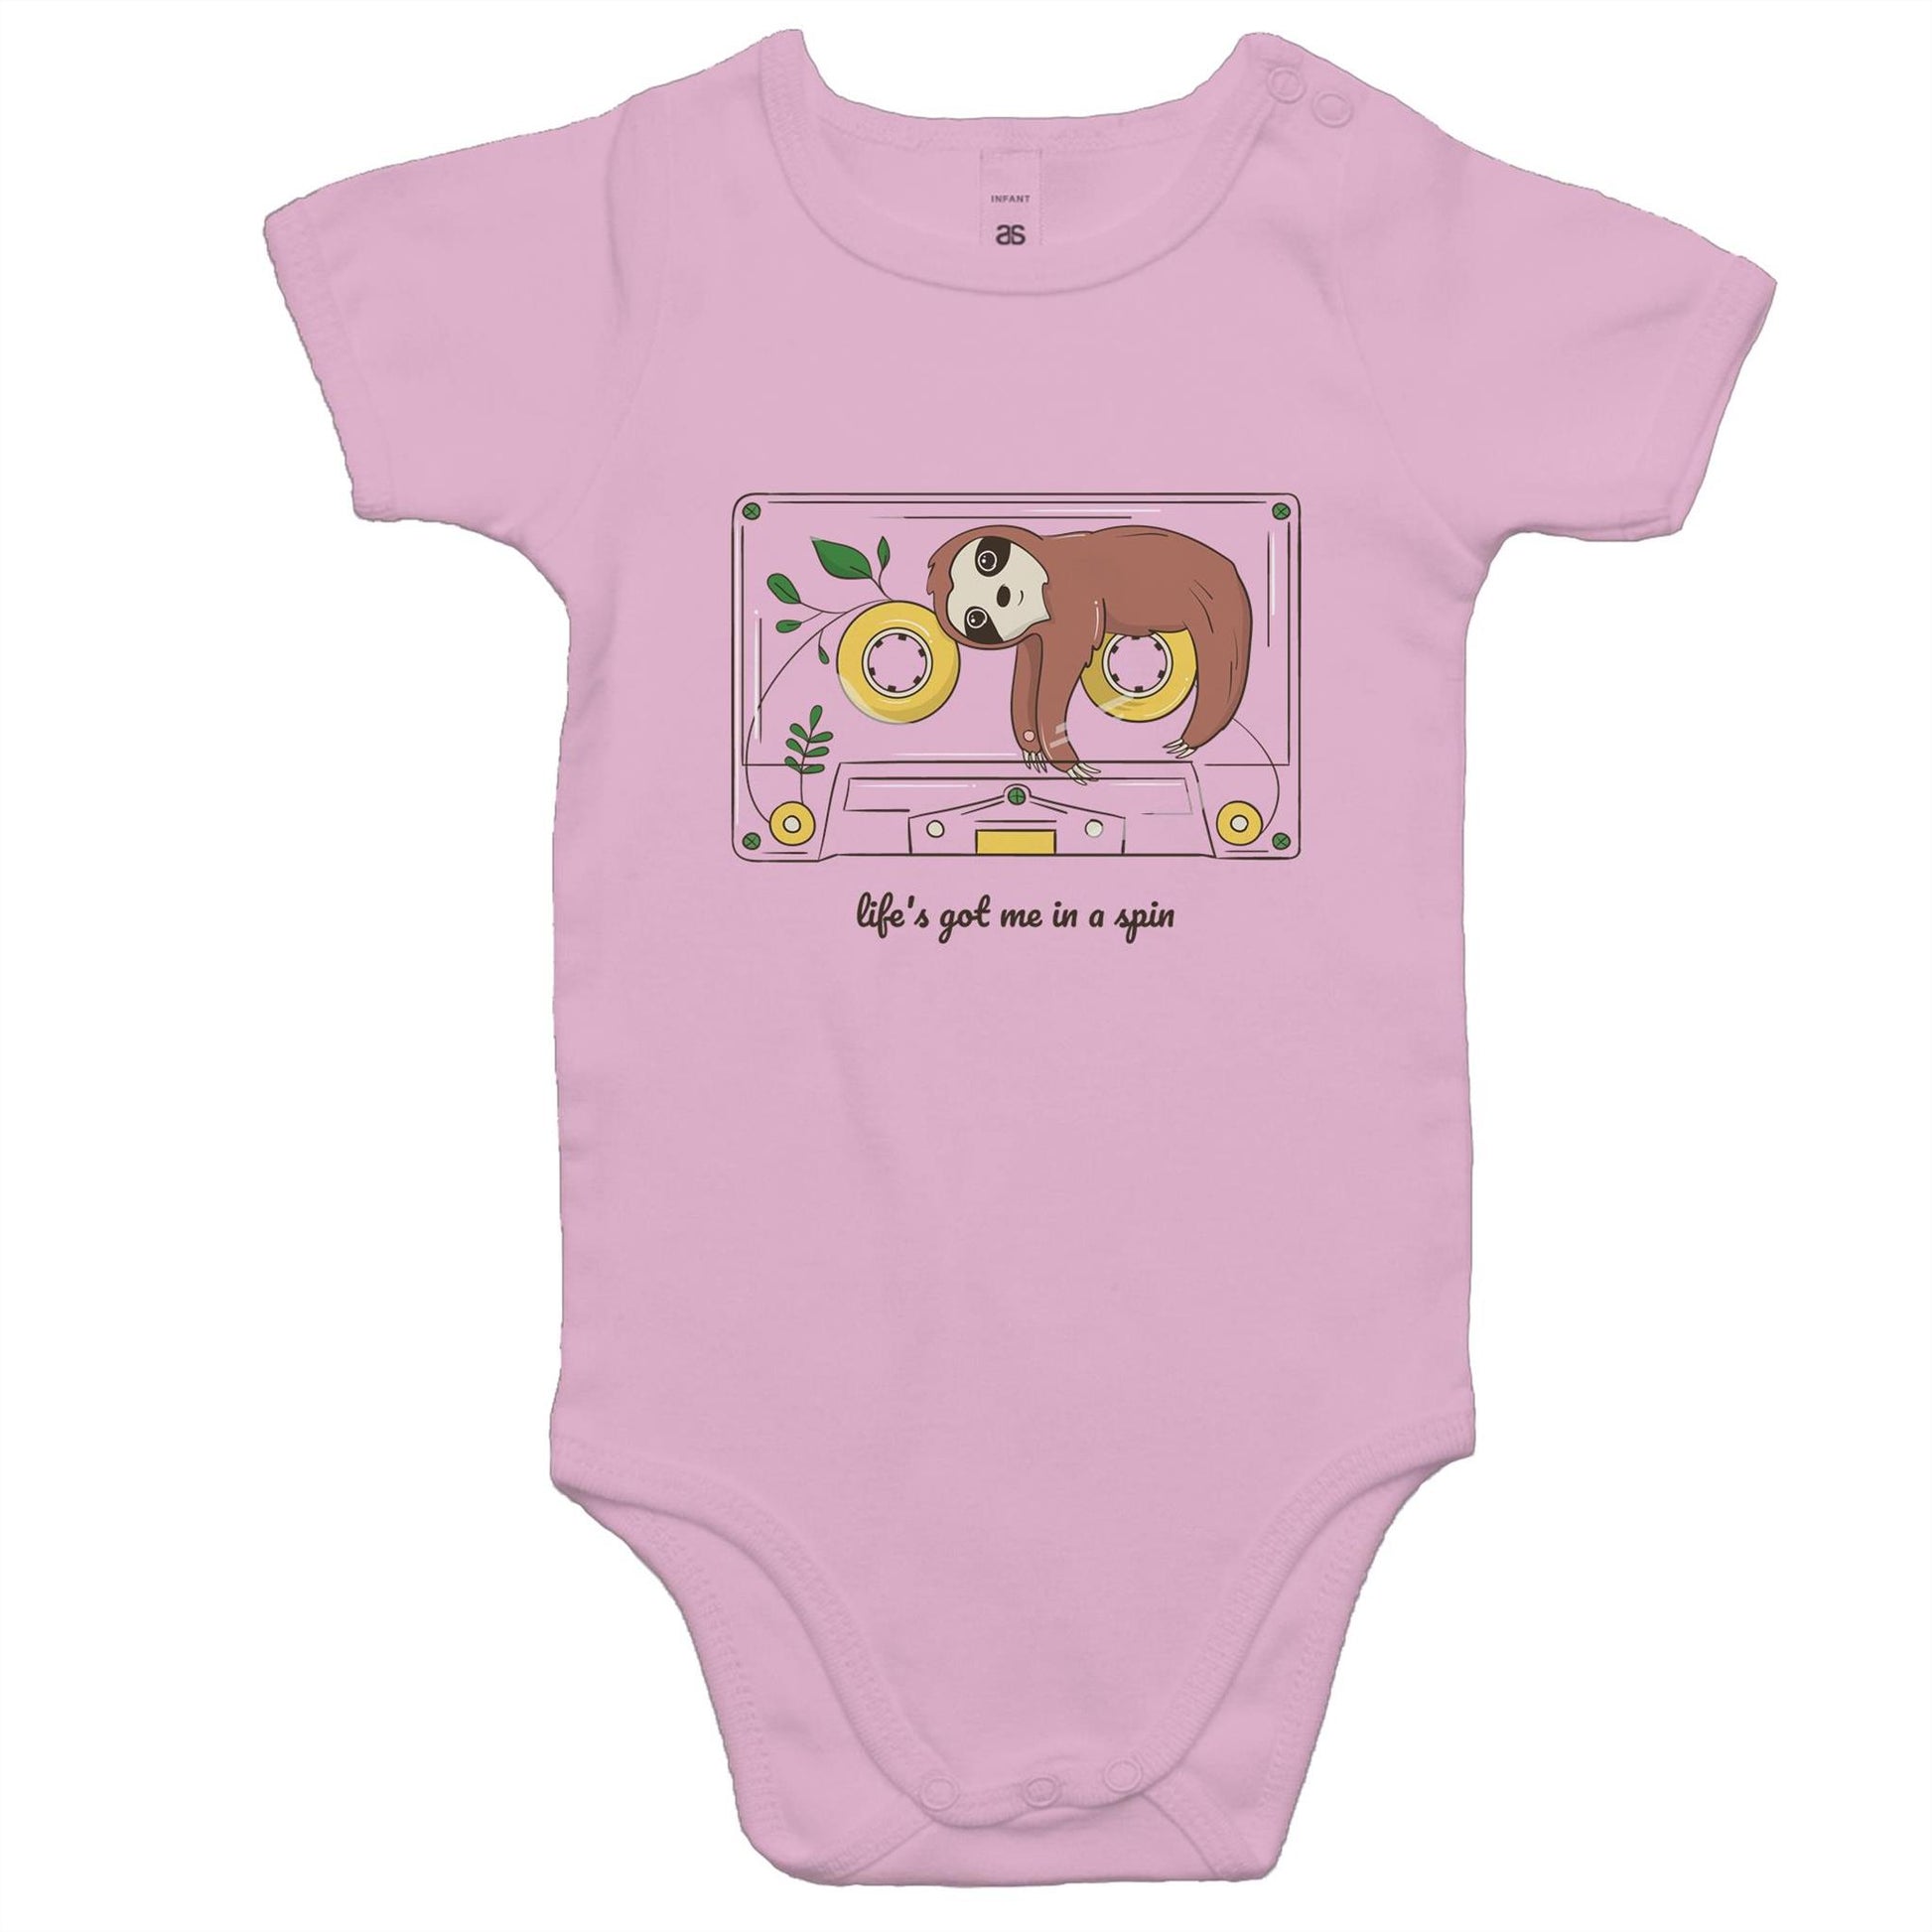 Cassette, Life's Got Me In A Spin - Baby Bodysuit Pink Baby Bodysuit animal Music Retro